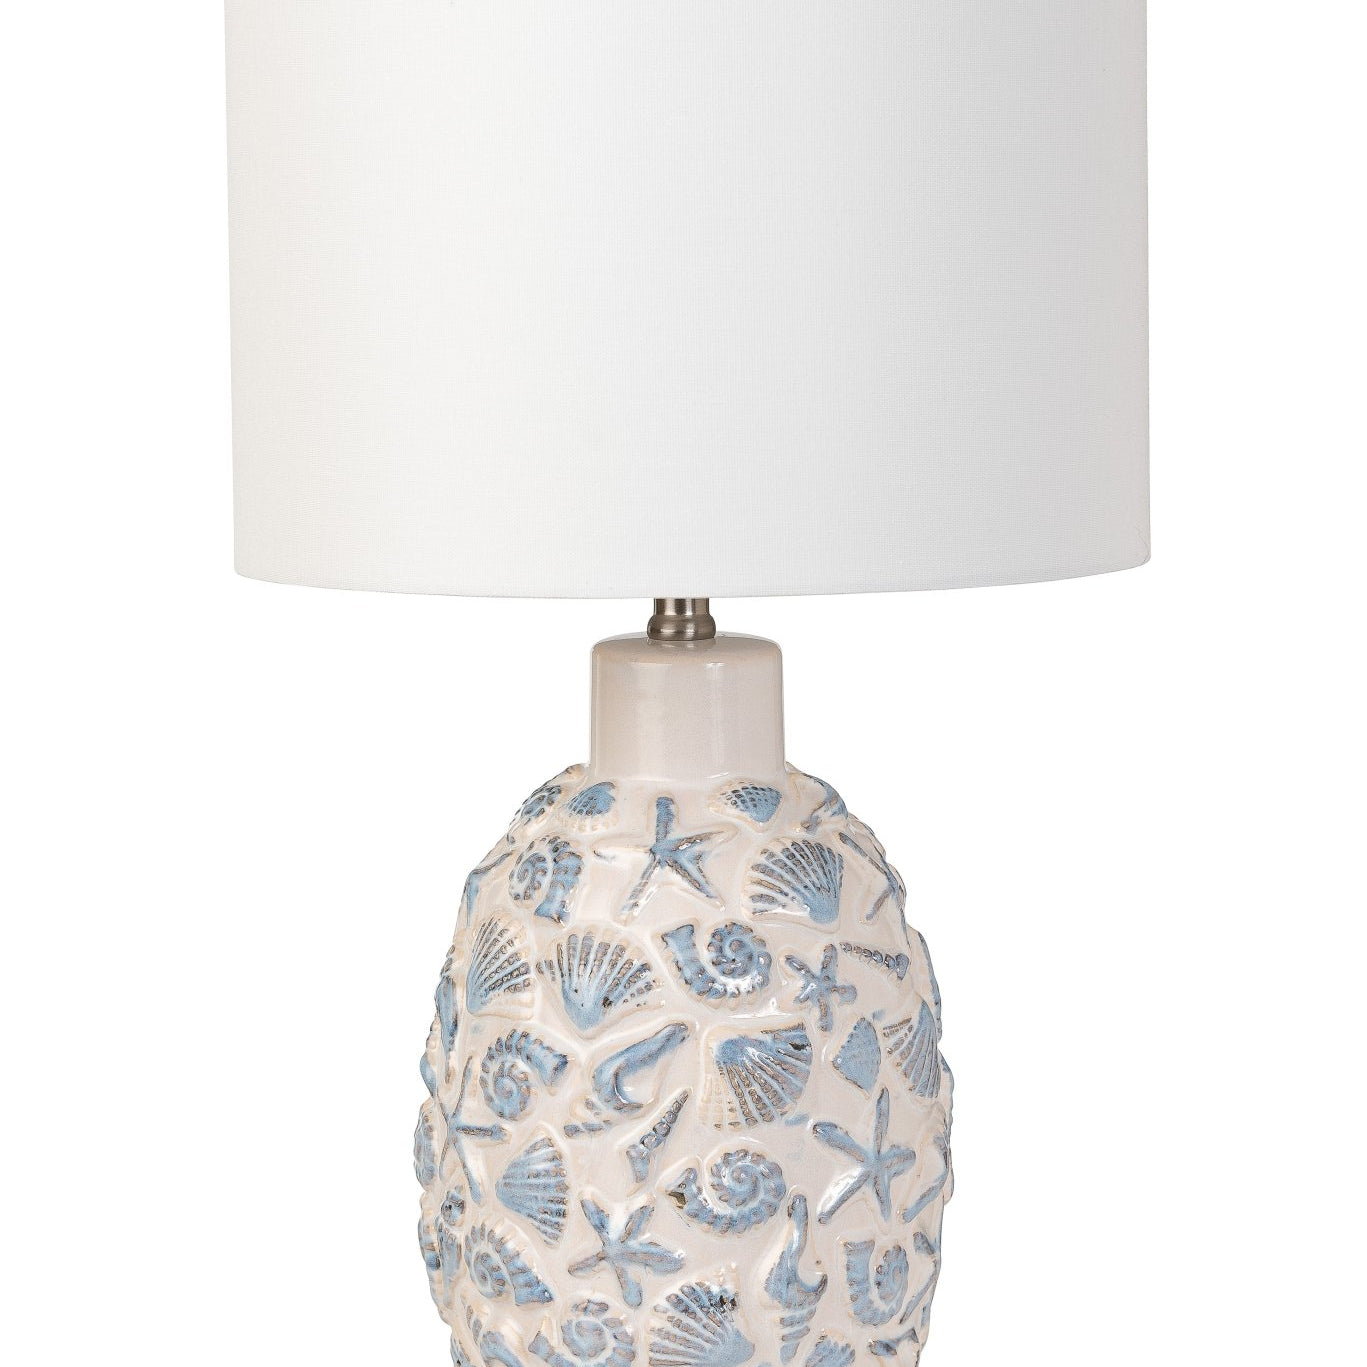 Jenny-26-Inch-Ceramic-Table-Lamp-(Set-of-2)-Table-Lamps